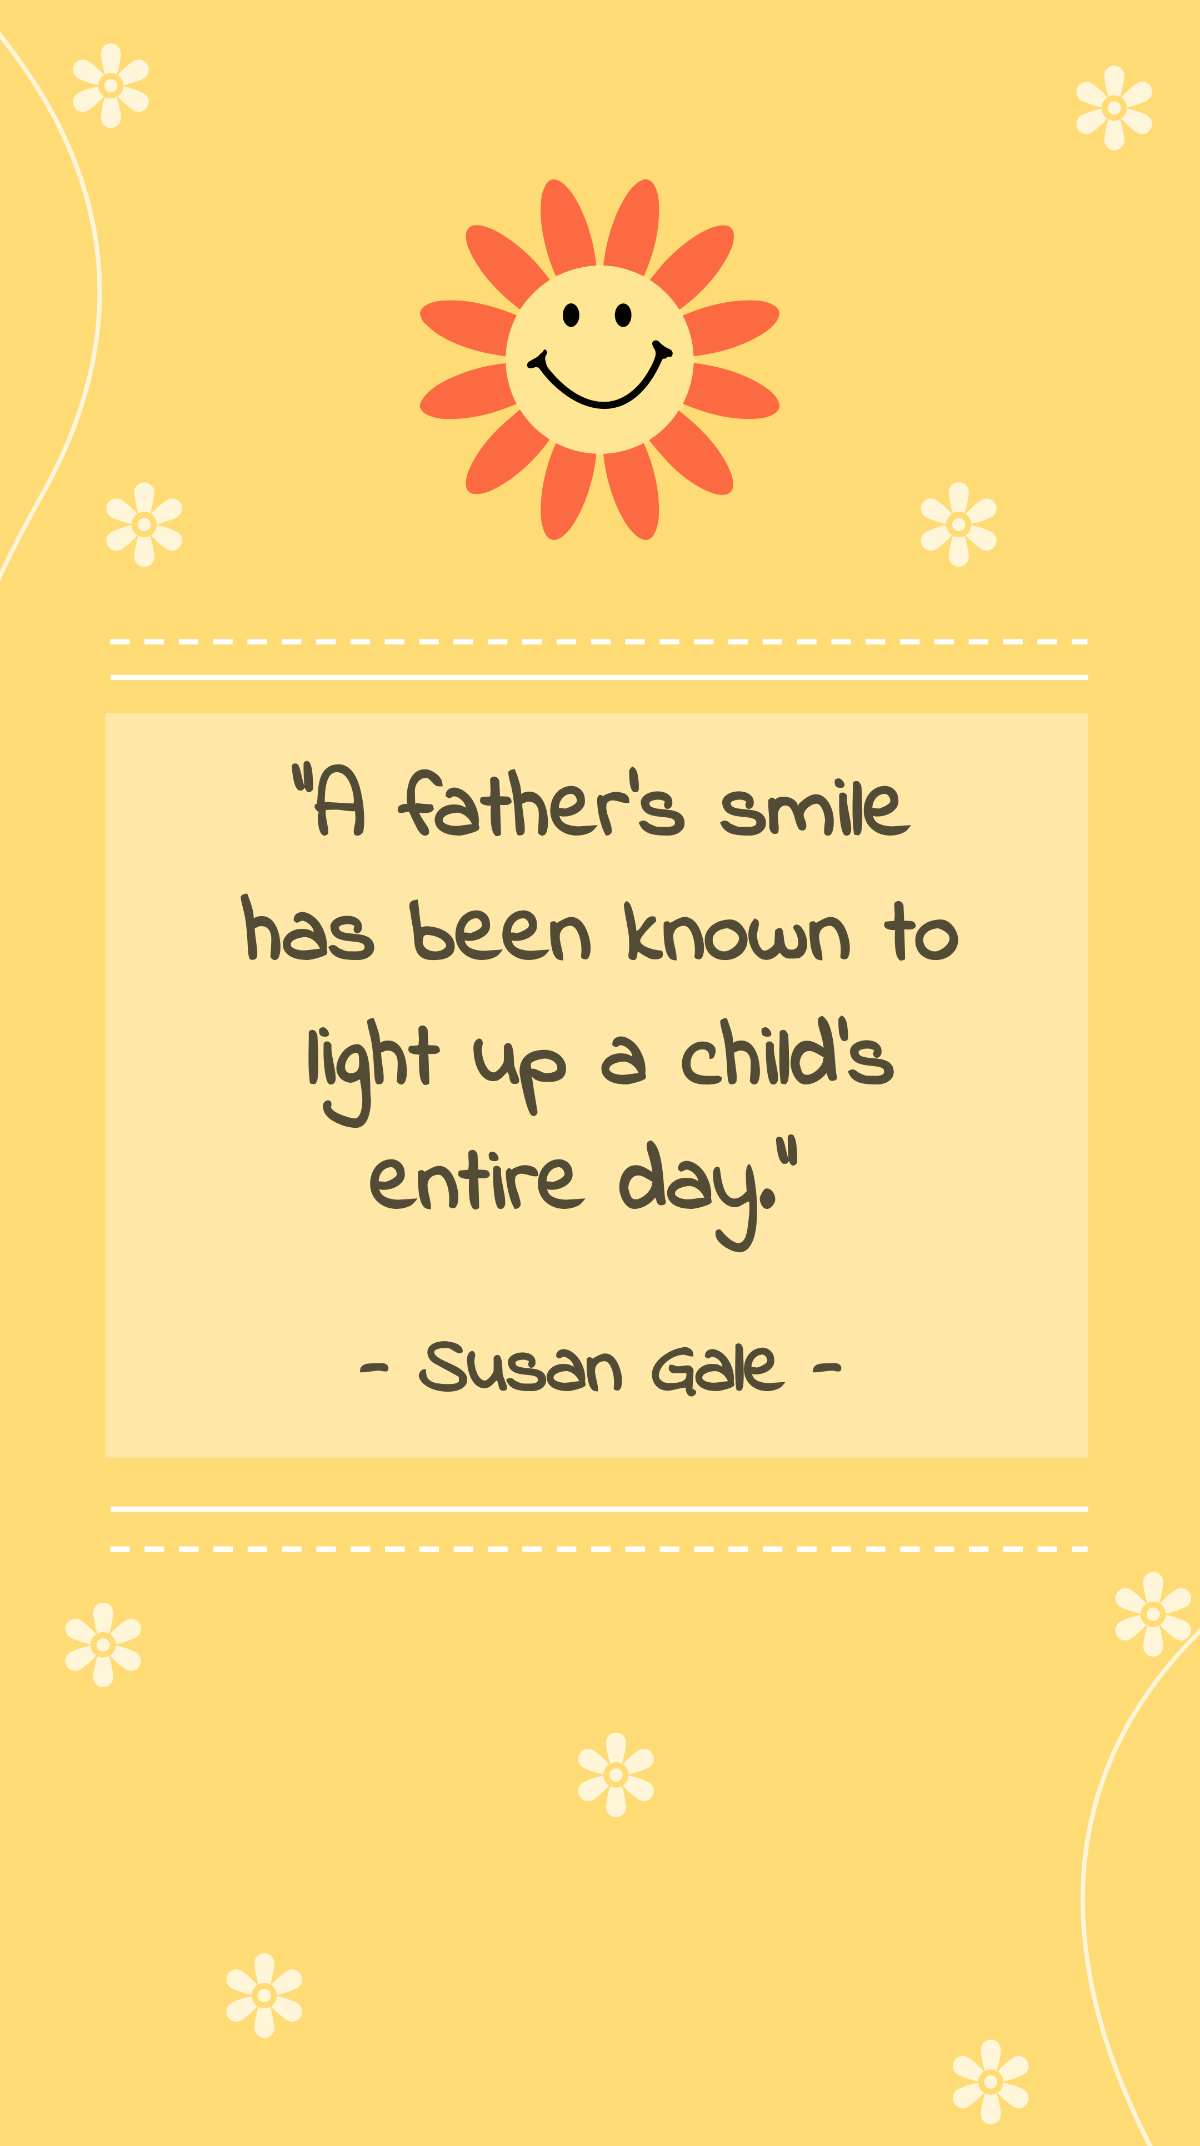 Susan Gale - “A father’s smile has been known to light up a child’s entire day.”  Template